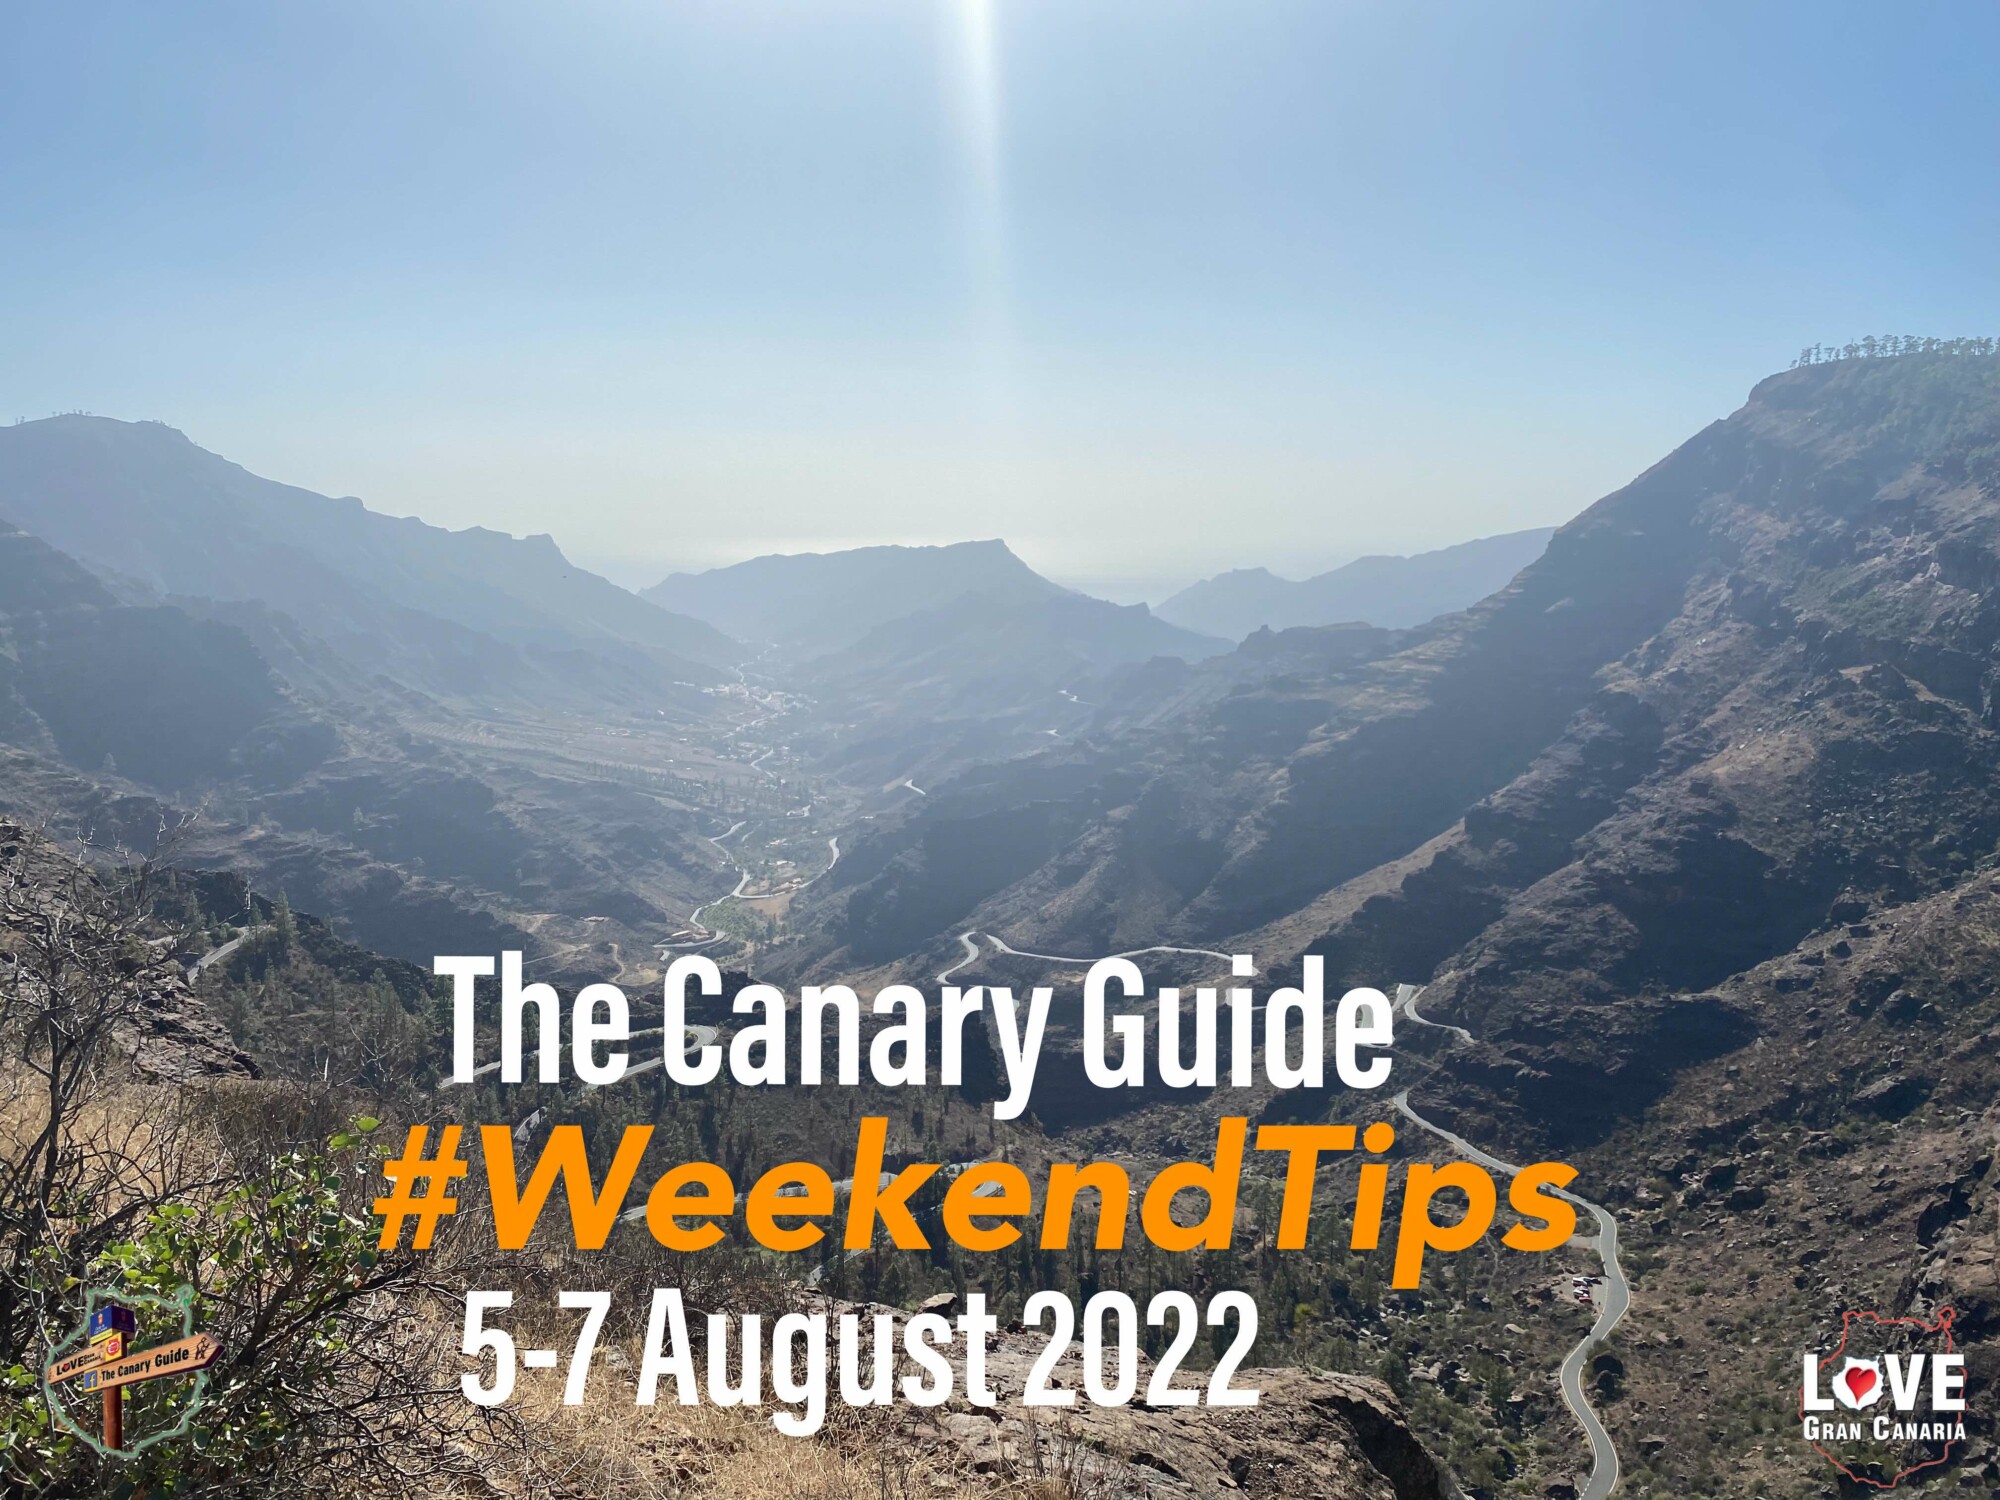 The Canary Guide #WeekendTips 5-7 August 2022